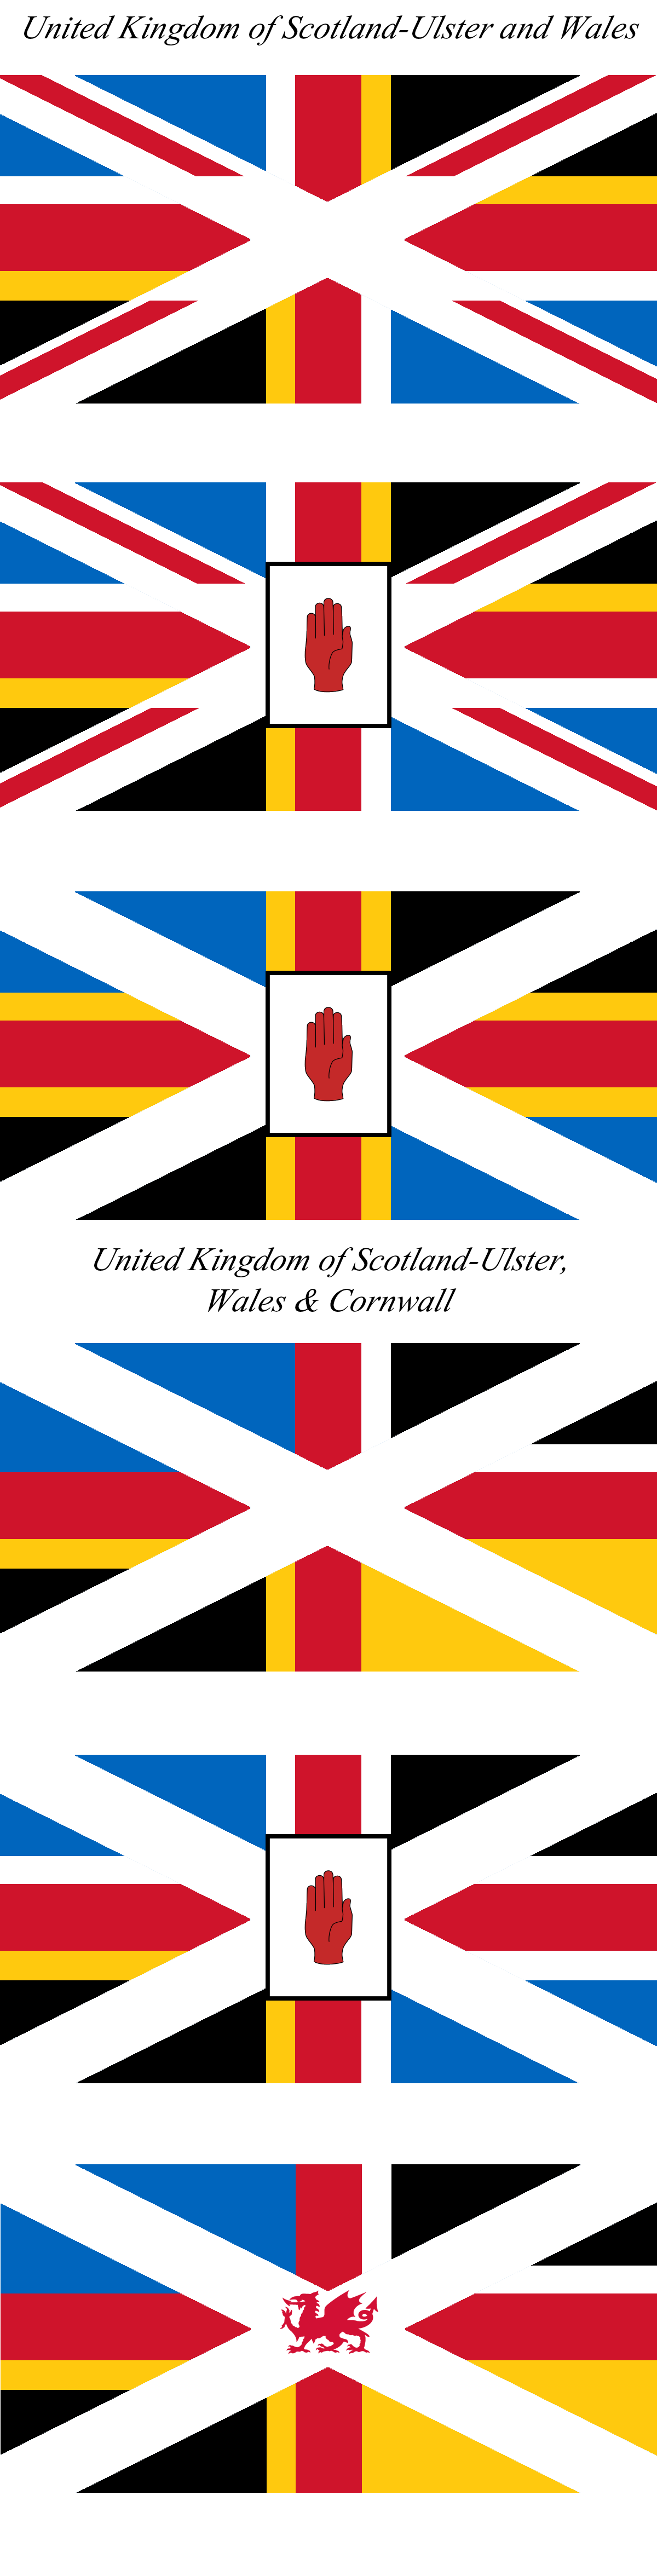 United Kingdom of Scotland-Ulster and Wales (Wales & Cornwall) Flag Designs.png